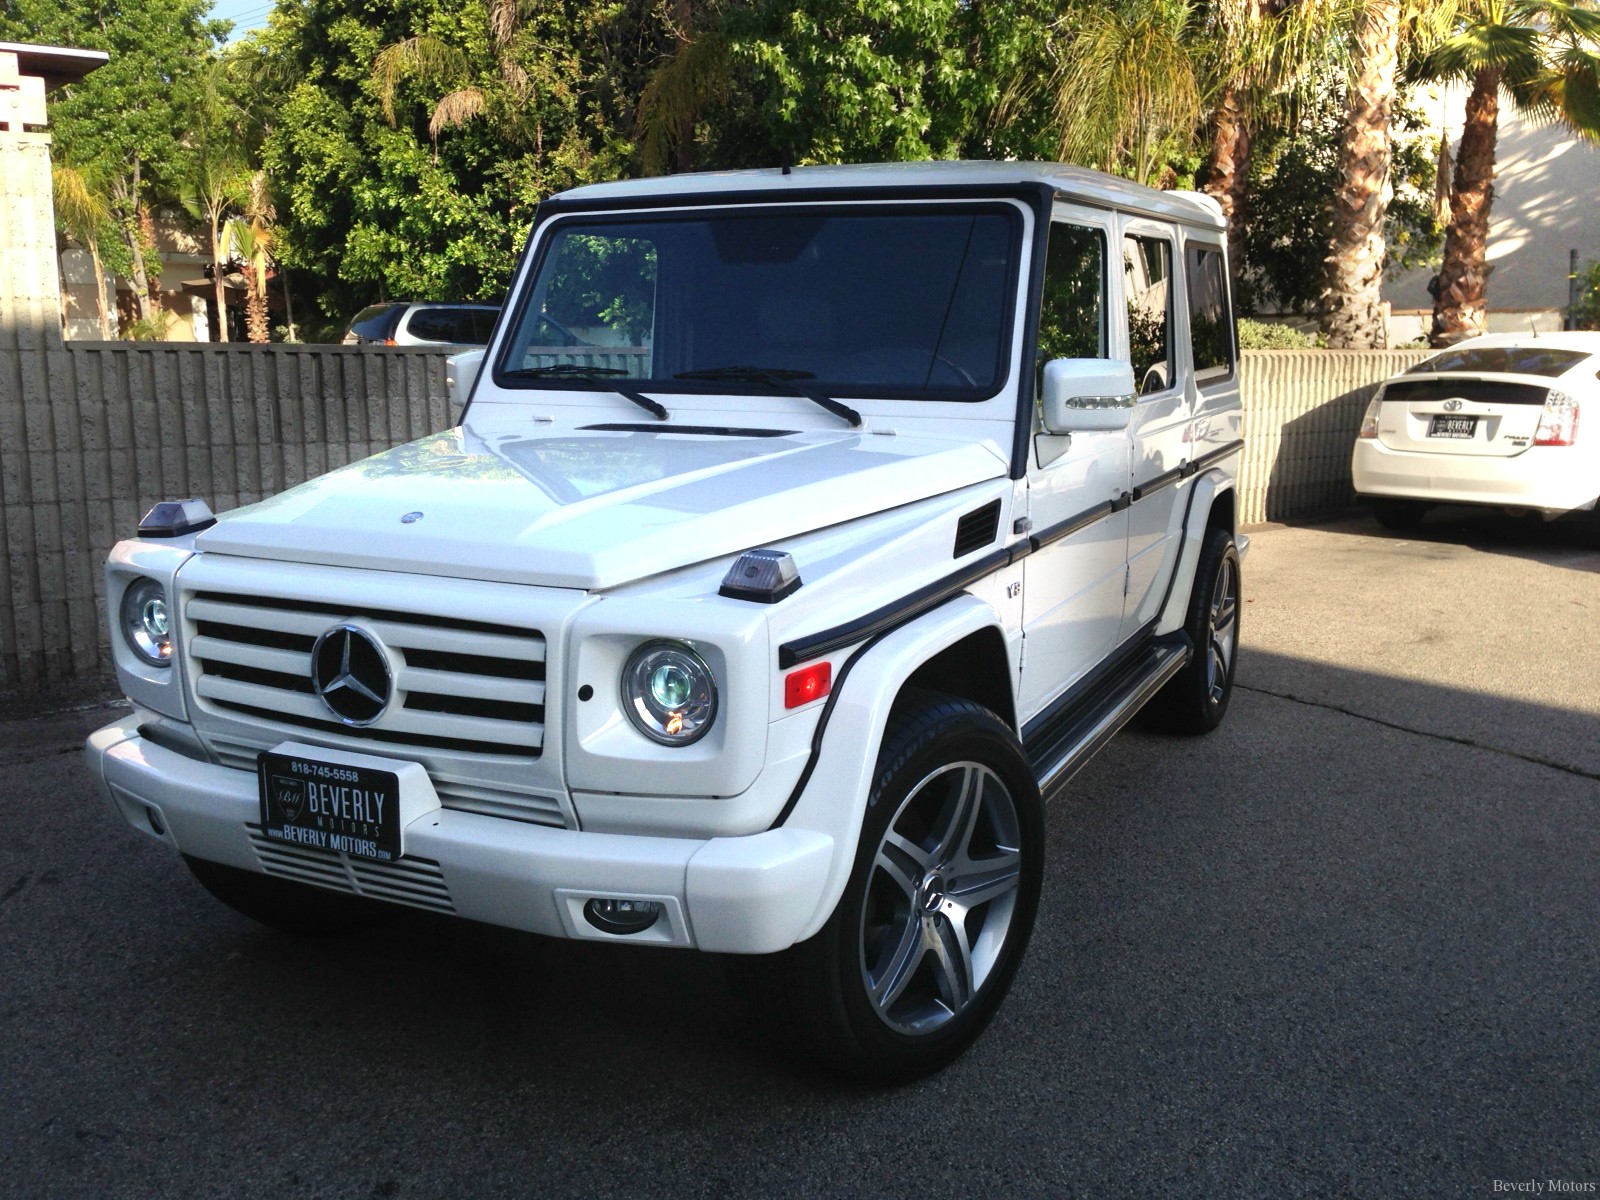 Beverly Motors Inc Glendale Auto Leasing And Sales New Car Lease Specials Burbank Beverly Hills Hollywood Pasadena North Hollywood 2002 Mercedes Benz G500 G Wagon Gwagen Gelik For Sale Glendale Auto Leasing